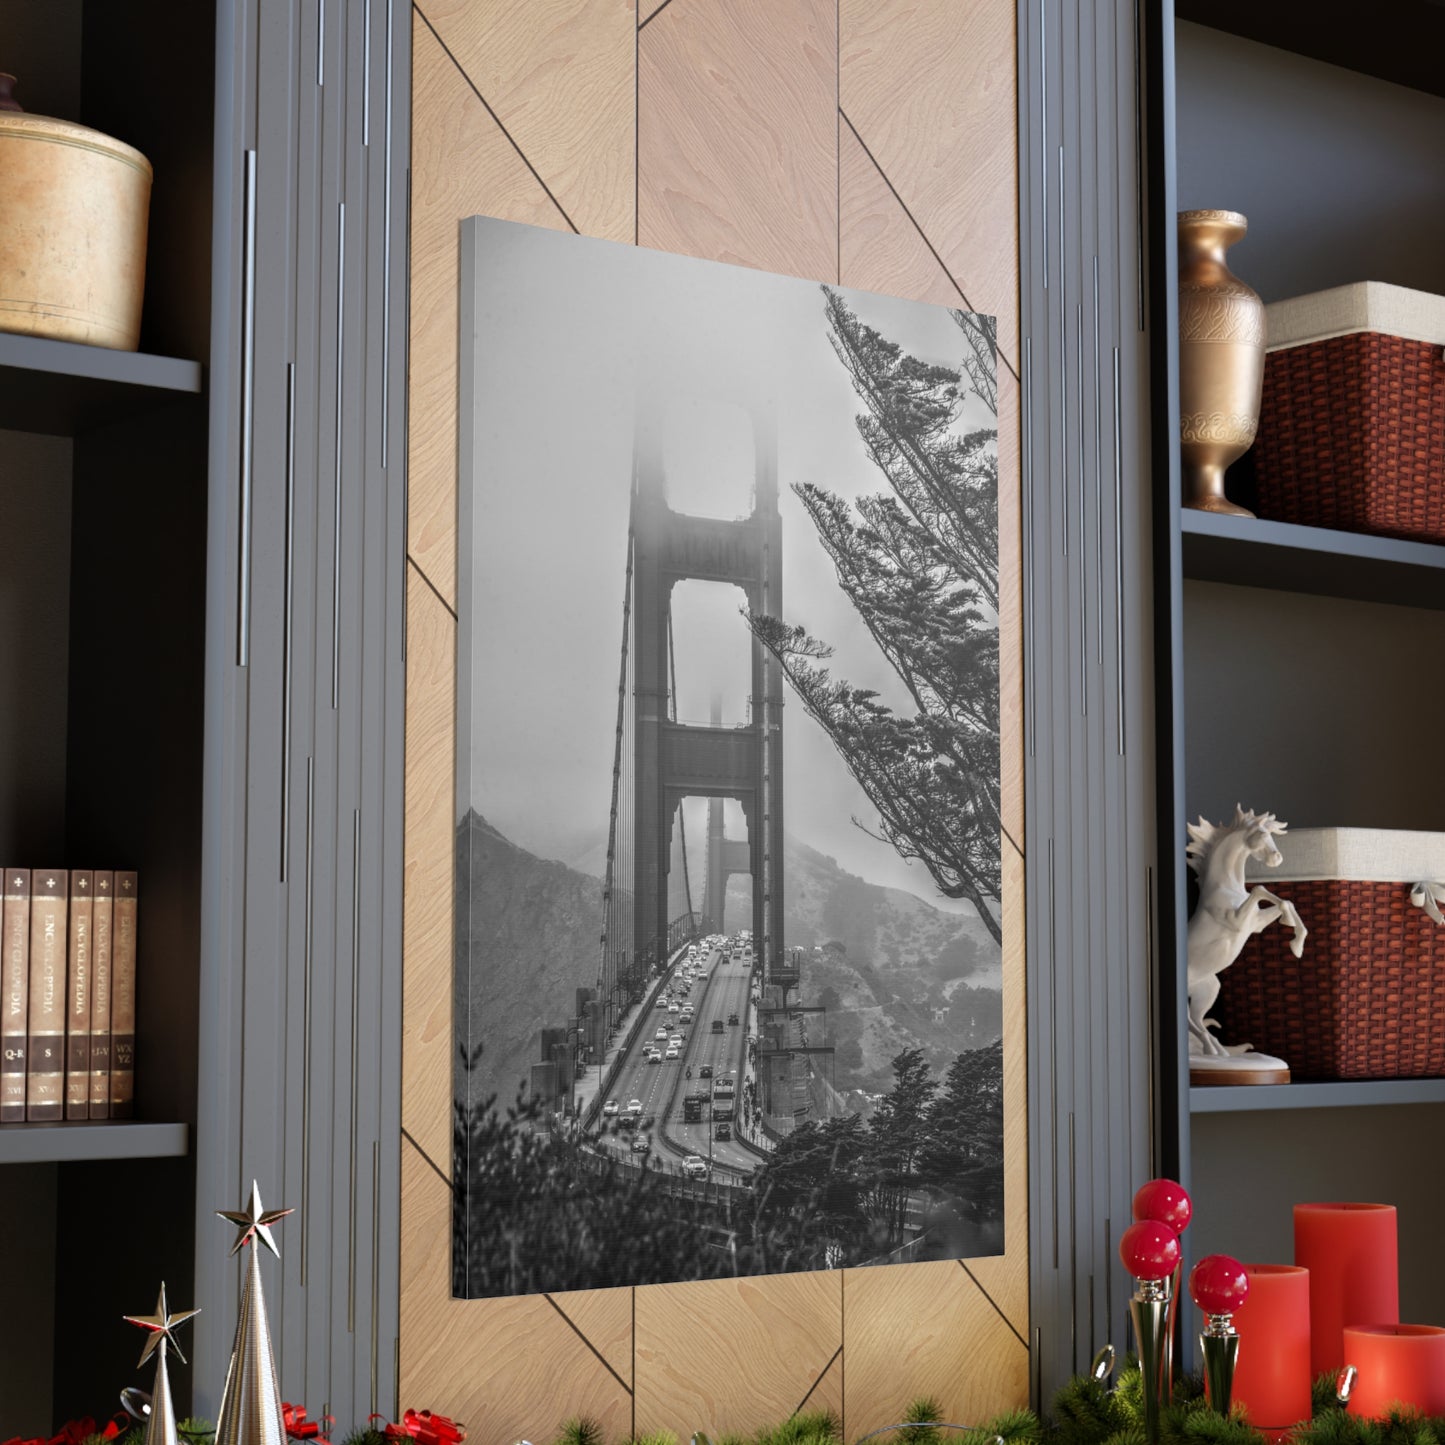 Canvas Print Of Golden Gate Bridge And Foliage In San Francisco For Wall Art